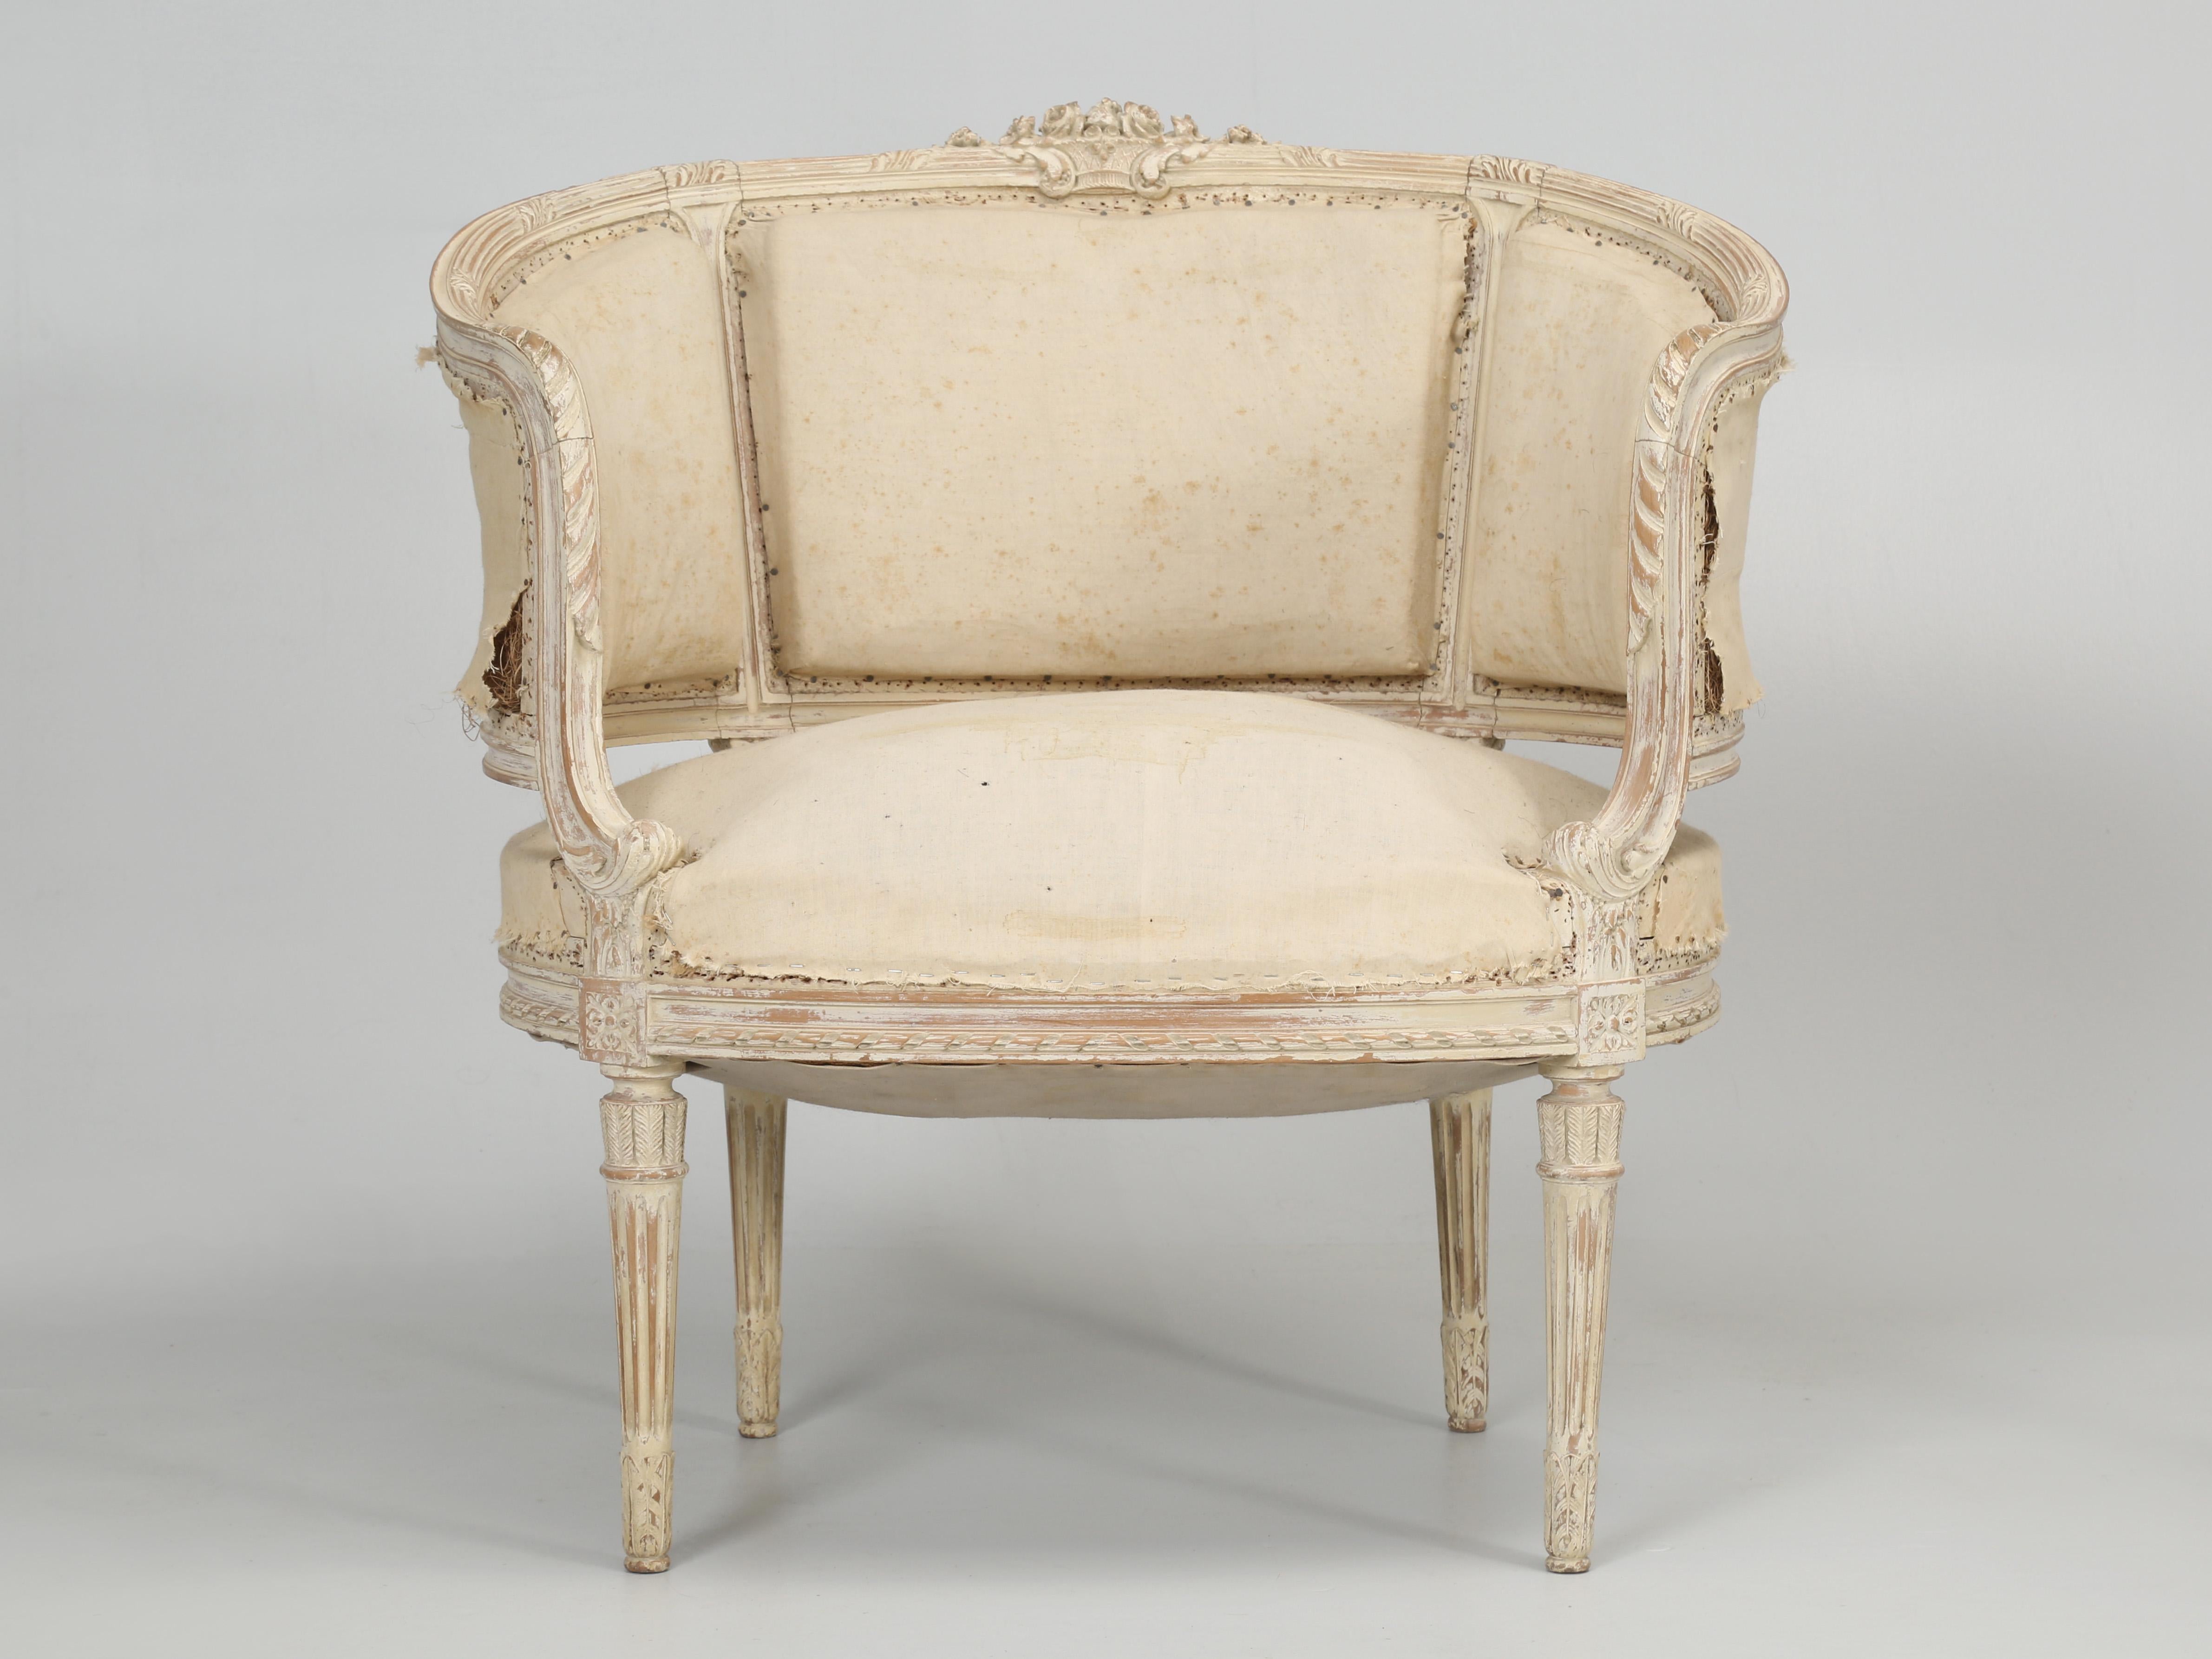 Antique pair of Louis XVI style Swedish bergère chairs in old paint, a bergère chairs is defined as; an upholstered armchair of an 18th century style having an exposed wood frame. This particular pair of antique painted Swedish arm chairs are being